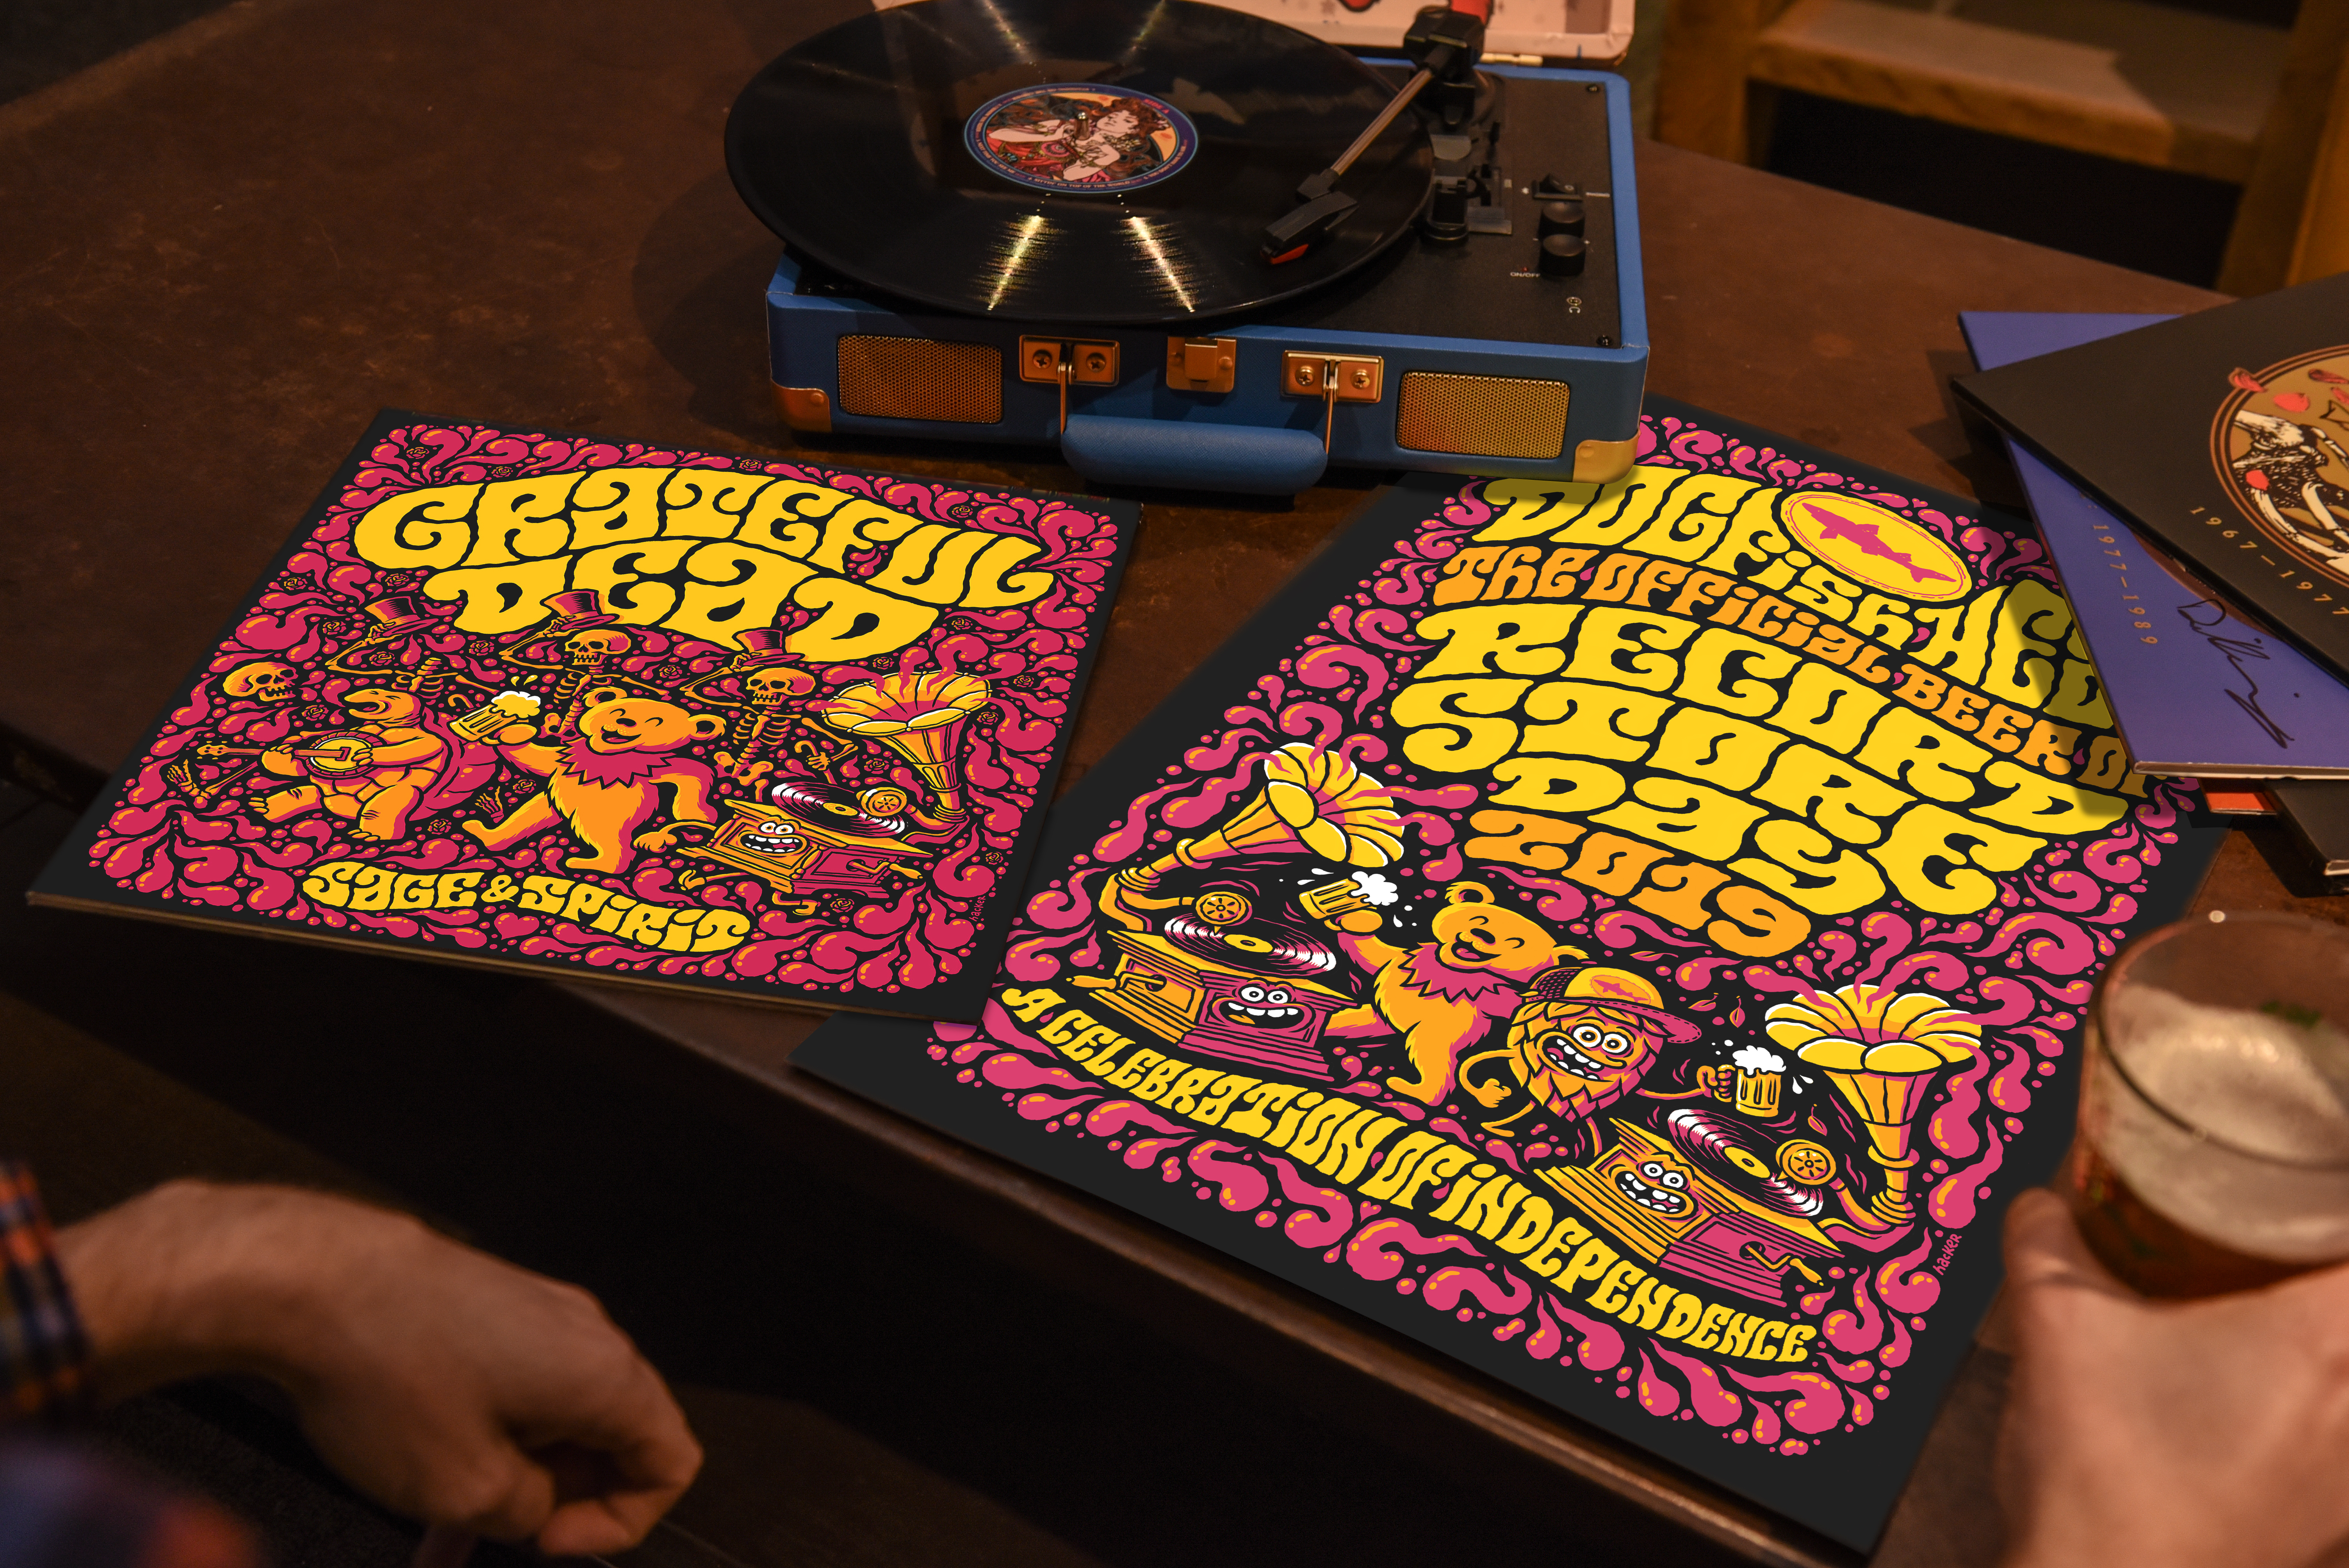 Dogfish Head and Grateful Dead collaborate to celebrate Record Store Day